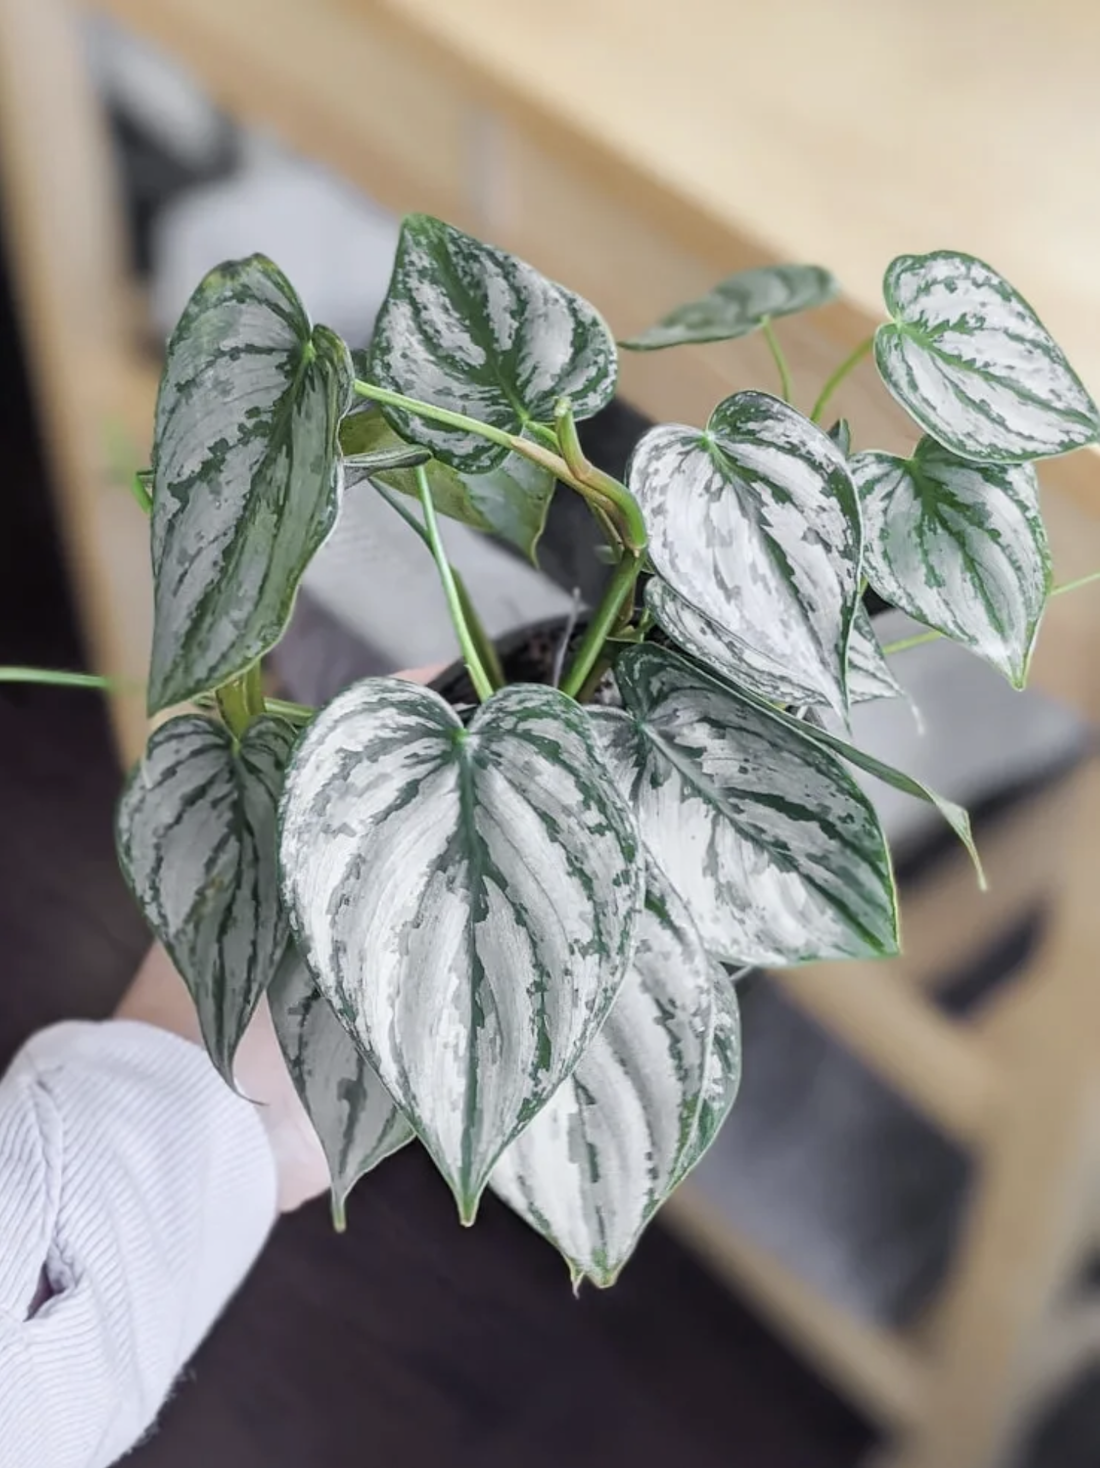 Silver Leaf Philodendron is quickly becoming one of the most popular indoor plants